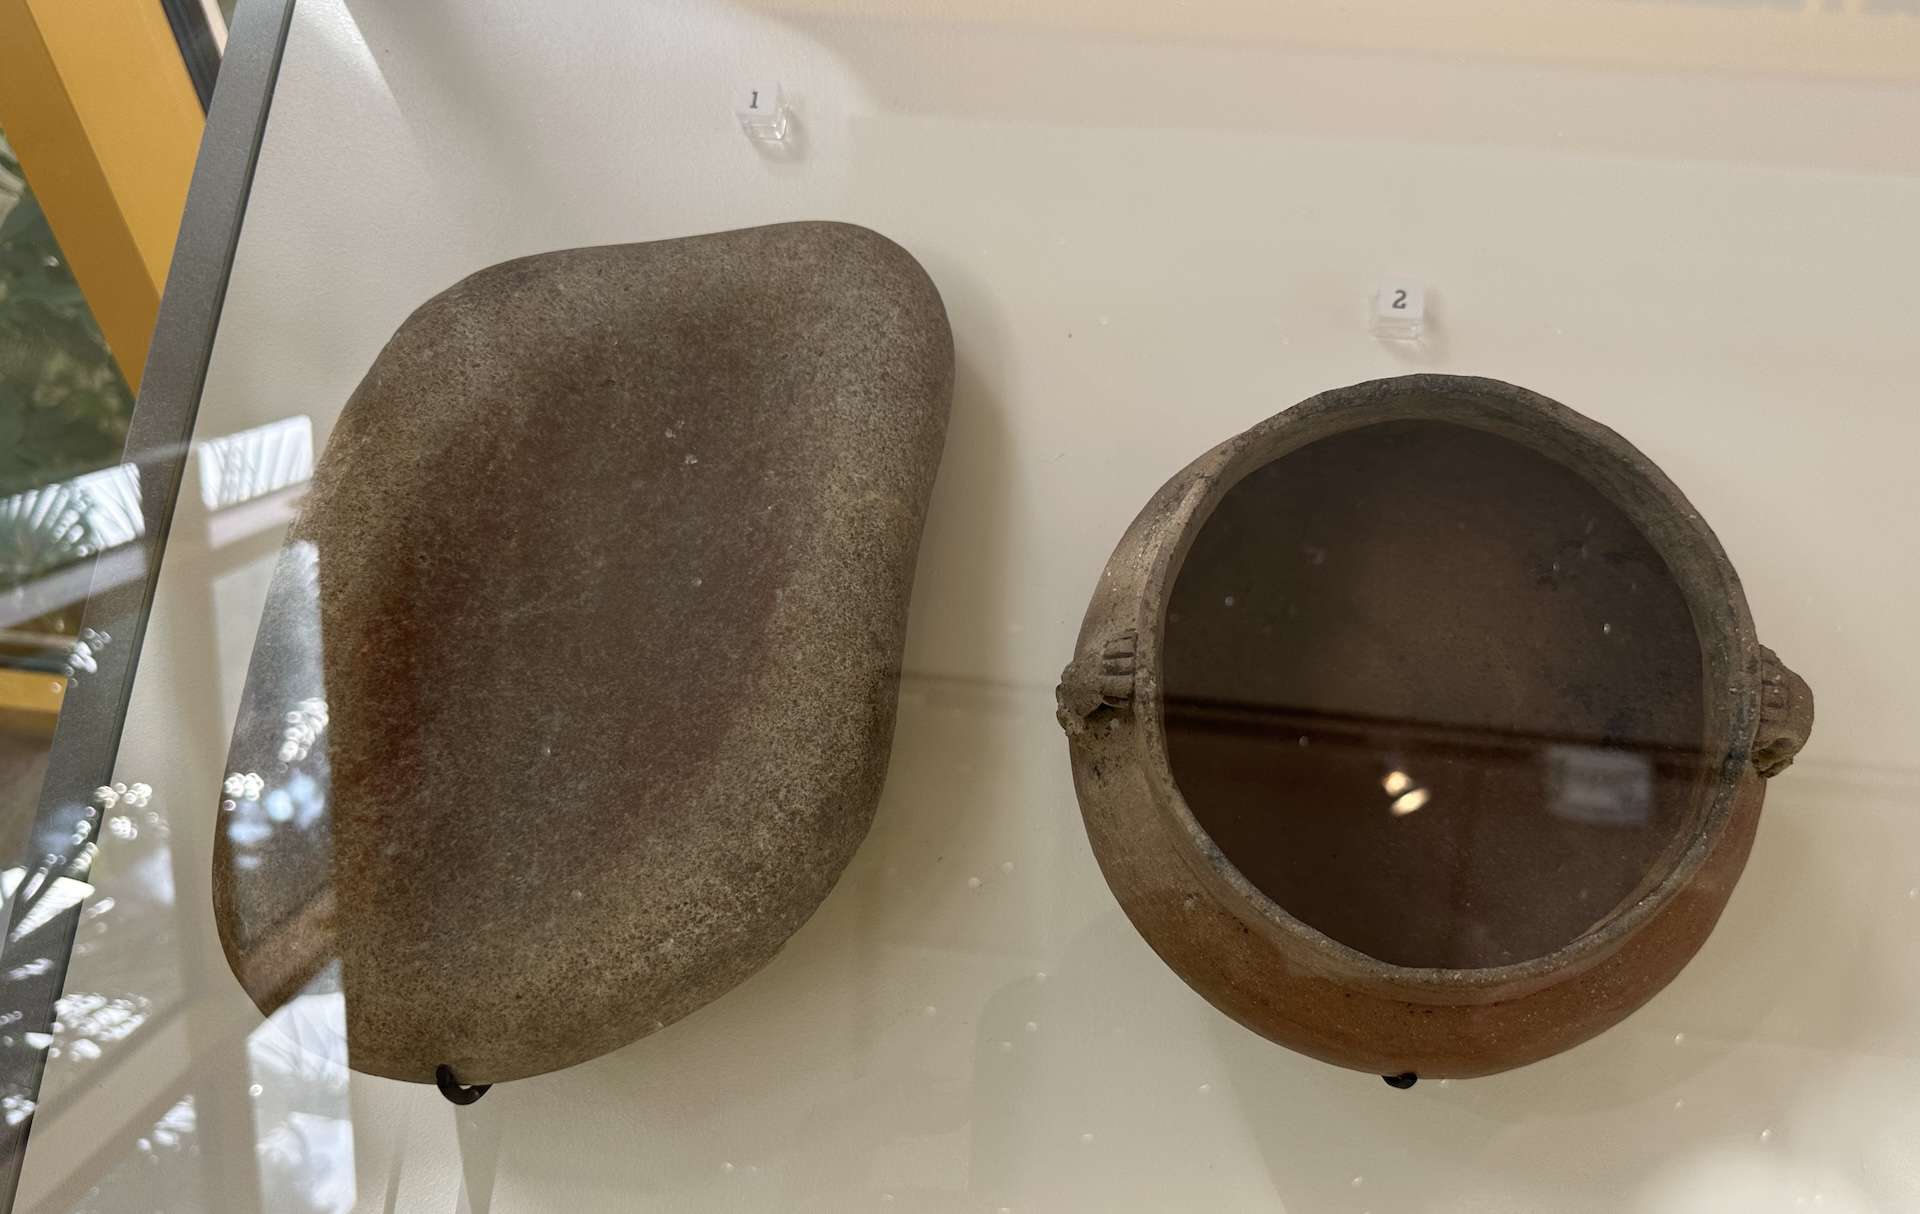 Pestle with a pigment stain (left) and jar (right); both from the Ceramic period at the National Archaeological Museum